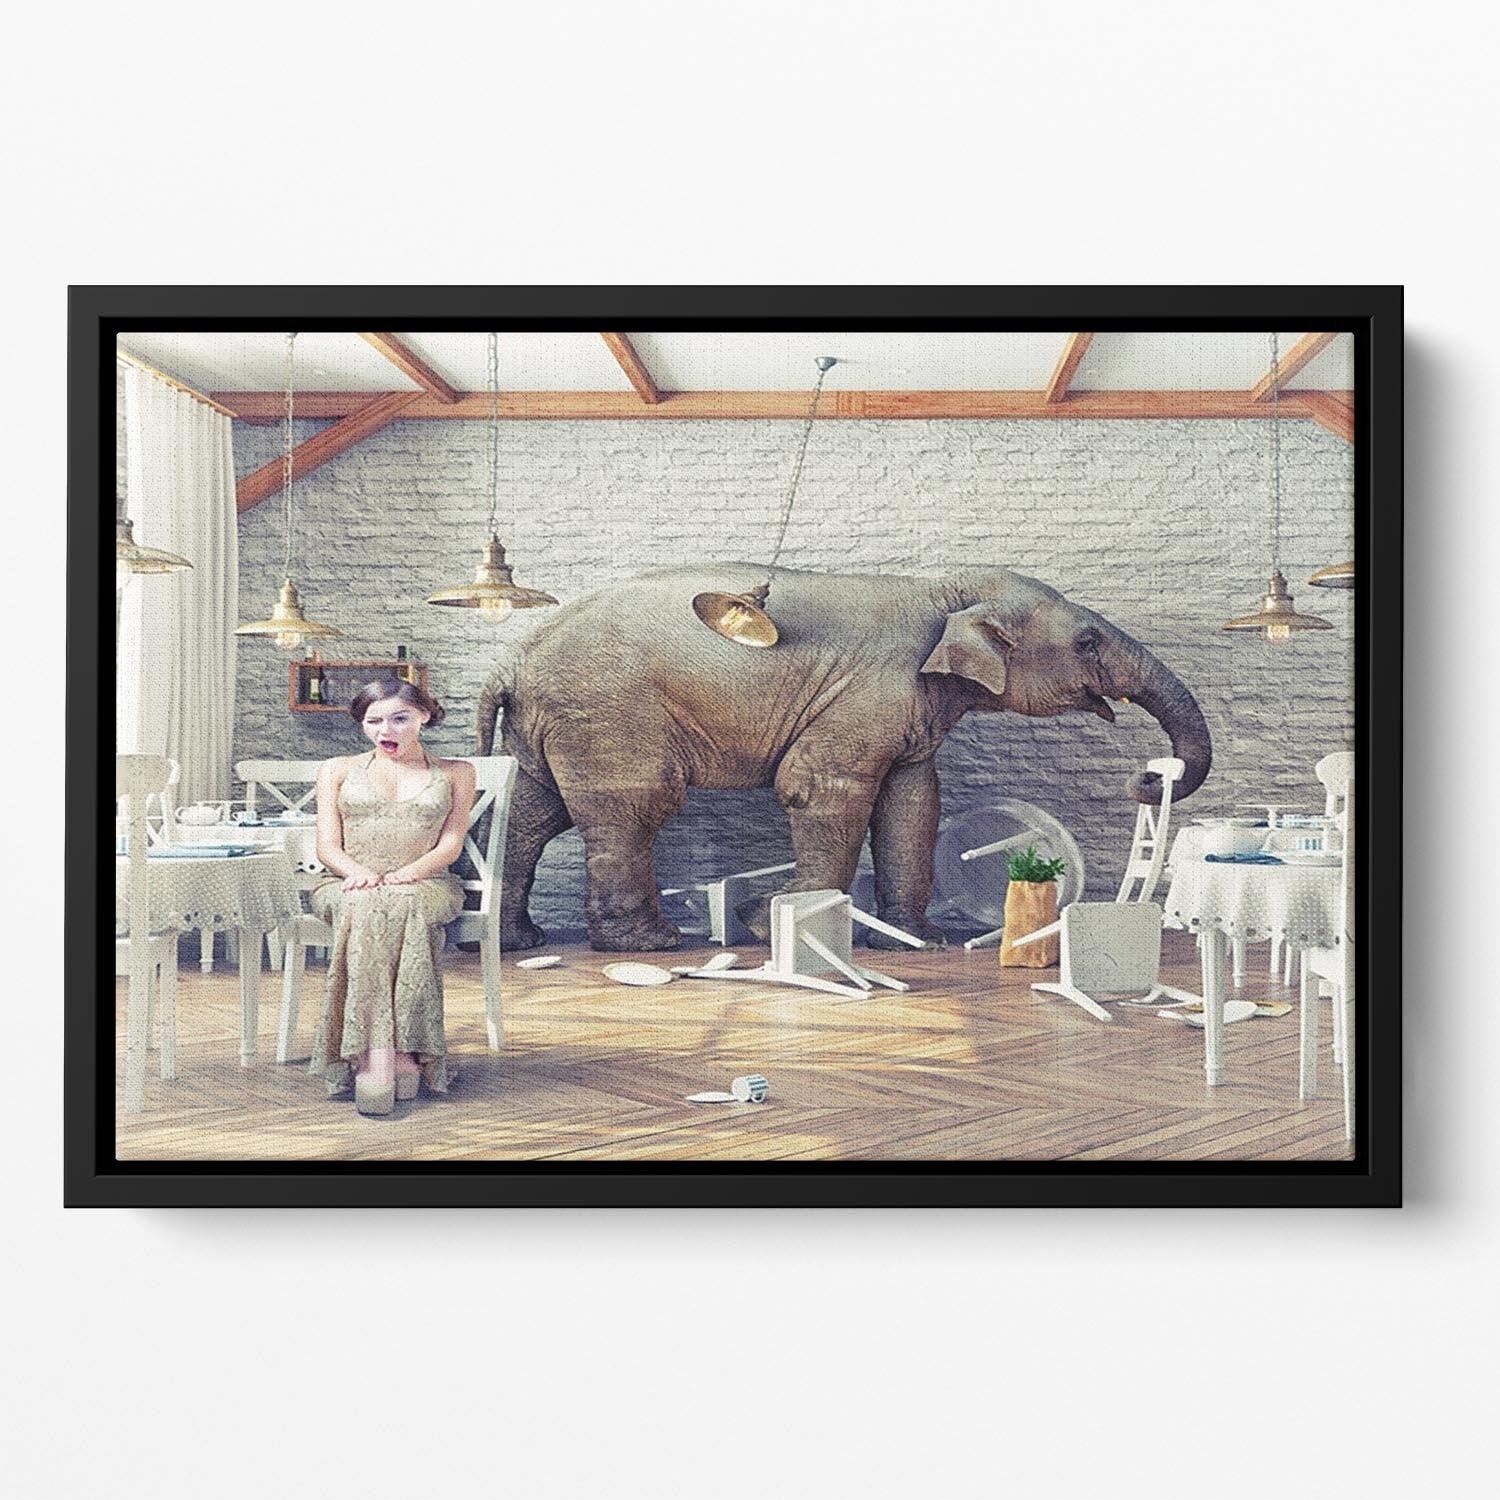 The elephant calm in a restaurant interior. photo combination concept Floating Framed Canvas - Canvas Art Rocks - 2